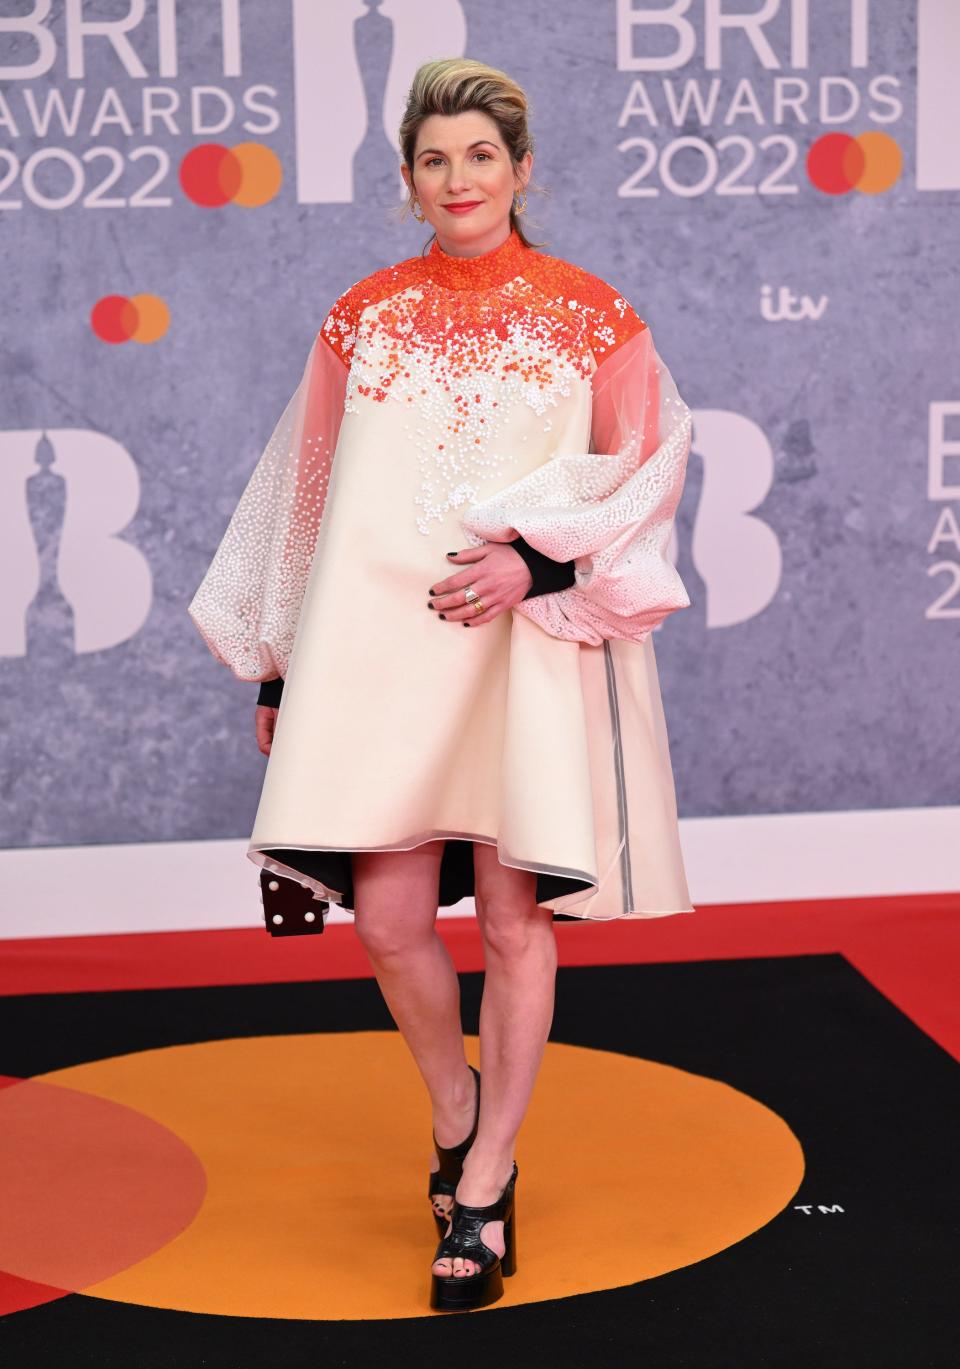 Jodie Whittaker walks the red carpet ahead of the 2022 BRIT Awards.